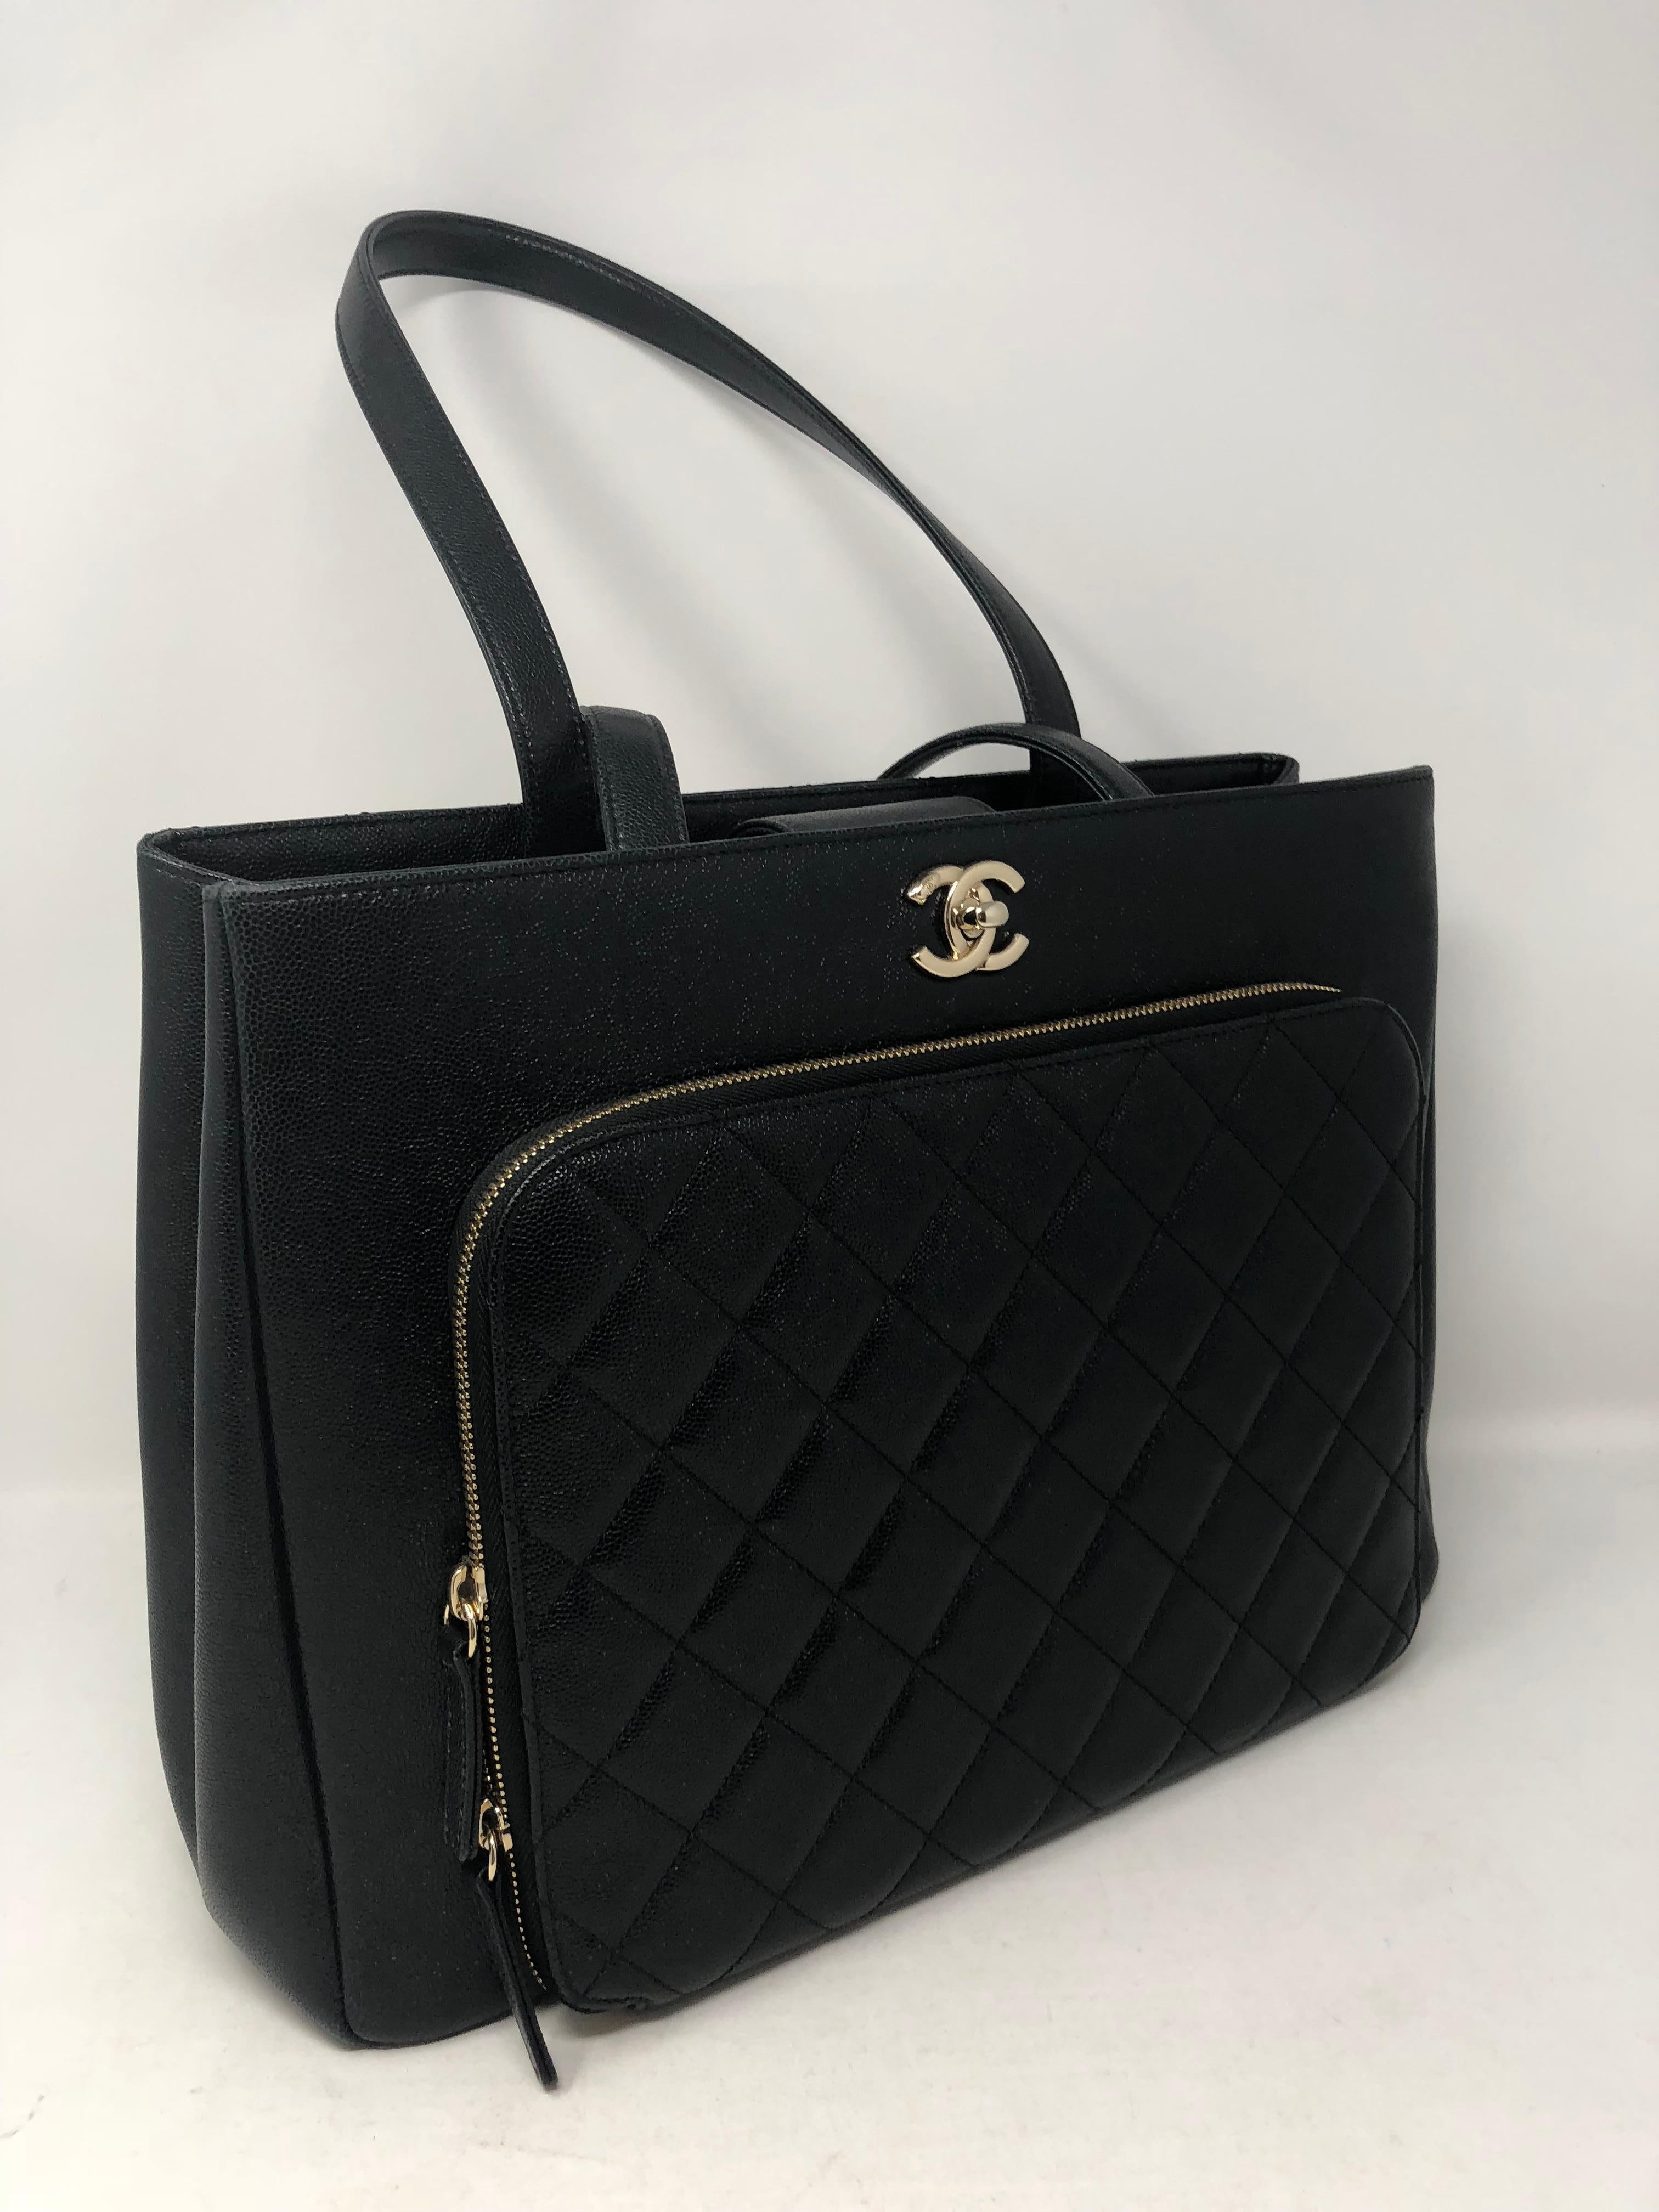 Chanel Large Busimess Affinity Shopping Tote in Black Caviar leather. Gold hardware. Like new condition. Brand new style for 2017. The most wanted bag in caviar. A great work bag for all your papers, etc. Guaranteed authentic. 